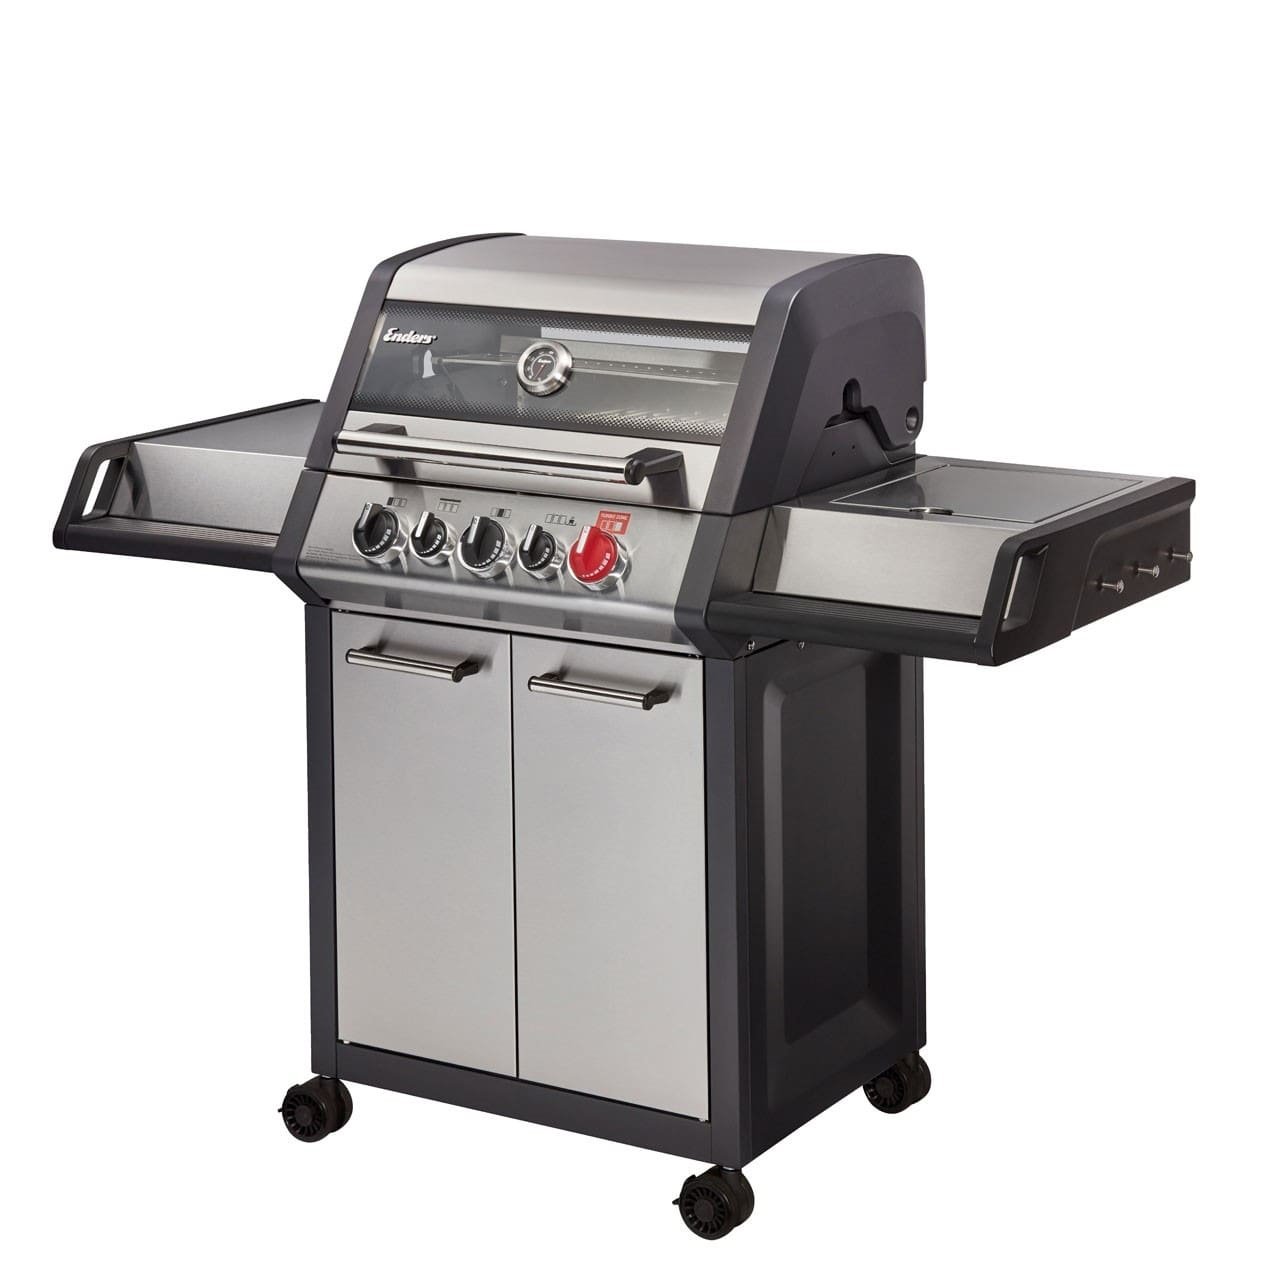 Enders Monroe Pro 3 SIK Turbo Gas Barbecue